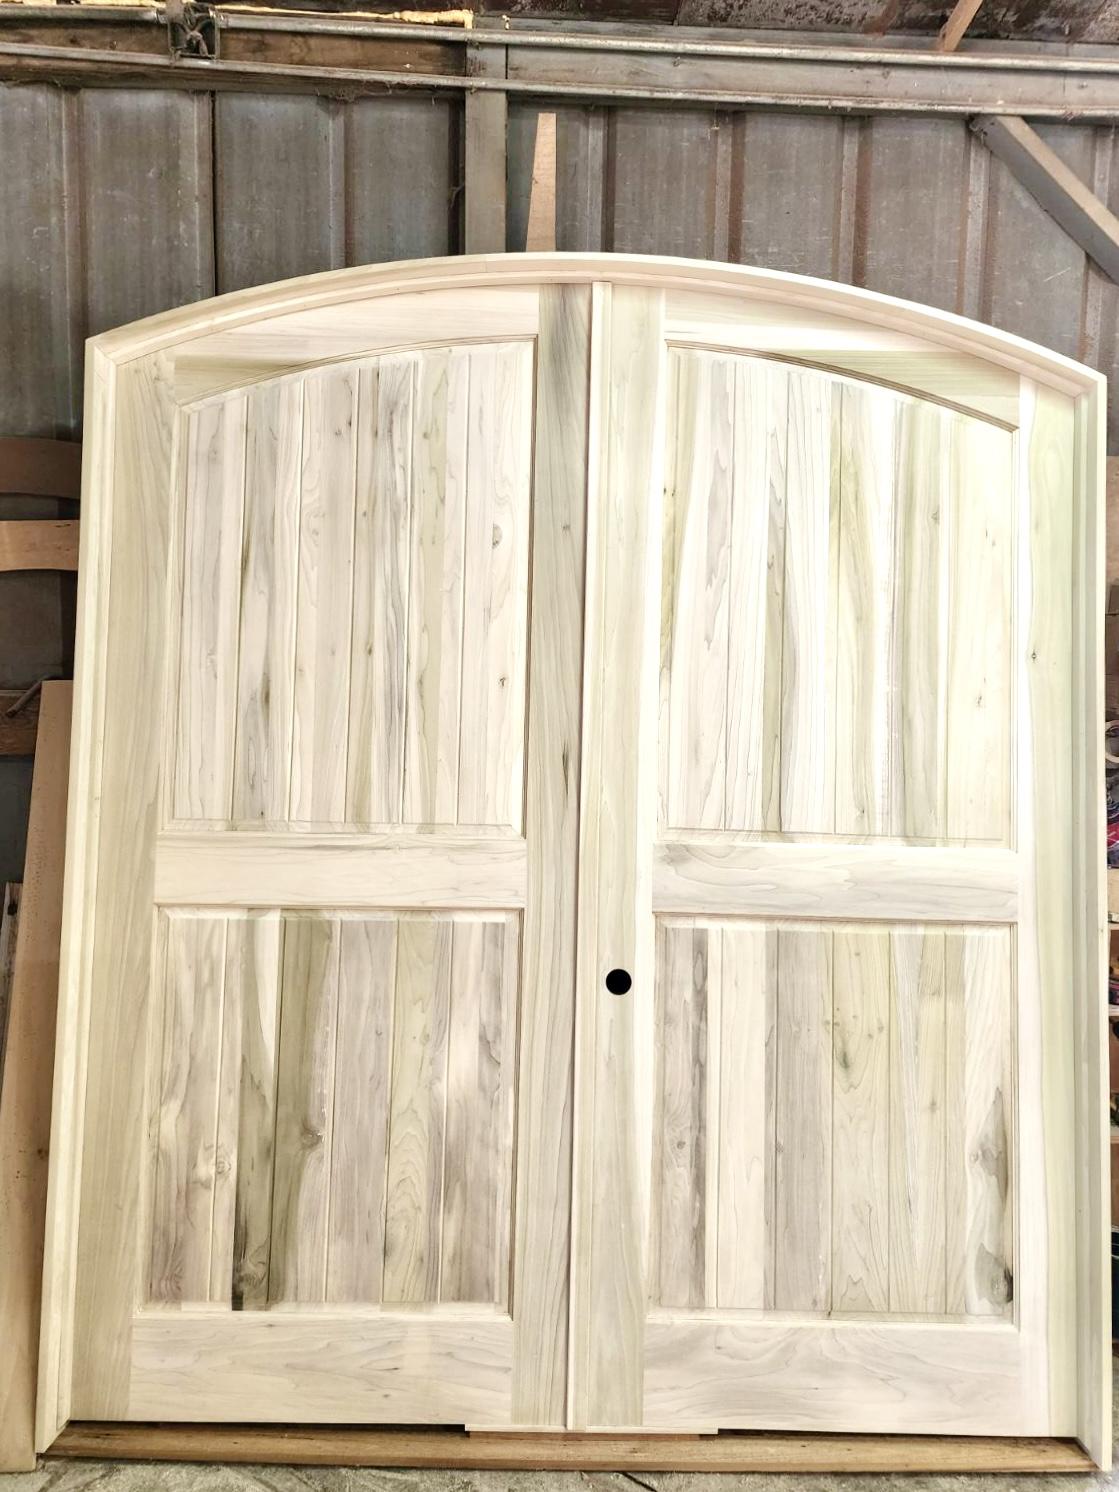 A wooden door in a barn

Description automatically generated